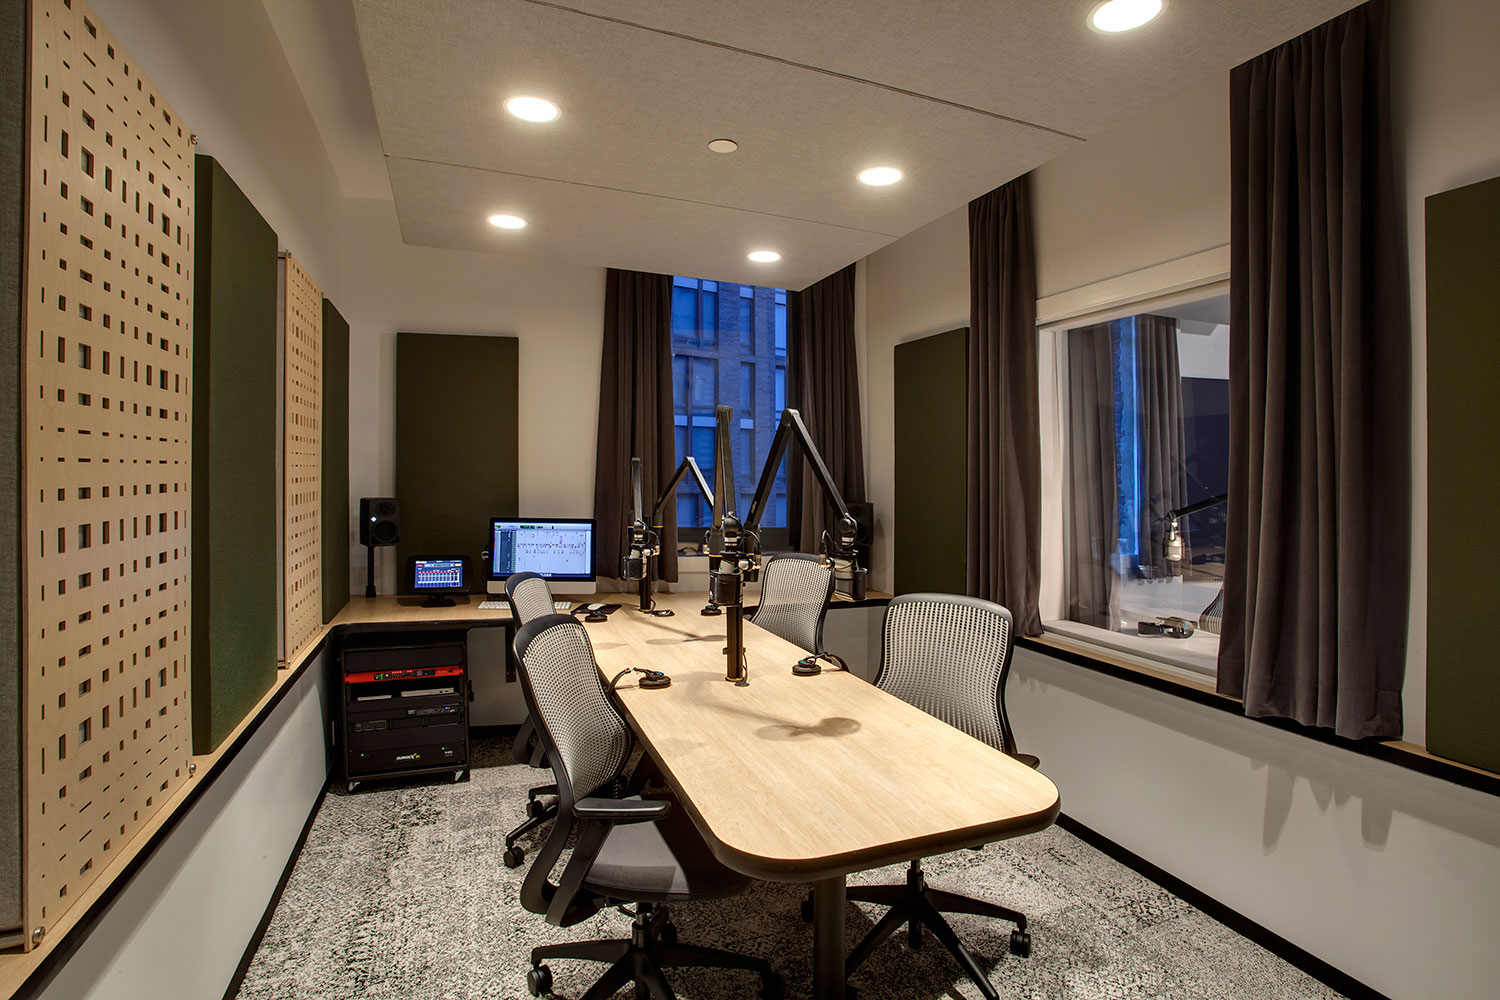 Gimlet Media, the award winning podcast production company is setting the standard in podcast creation studios with its new 28,000 square foot production facility. Designed by the acoustic architectural firm WSDG, it catapults Gimlet’s podcasting operations from a modest studio operation to a commercial-grade. Studio 3.